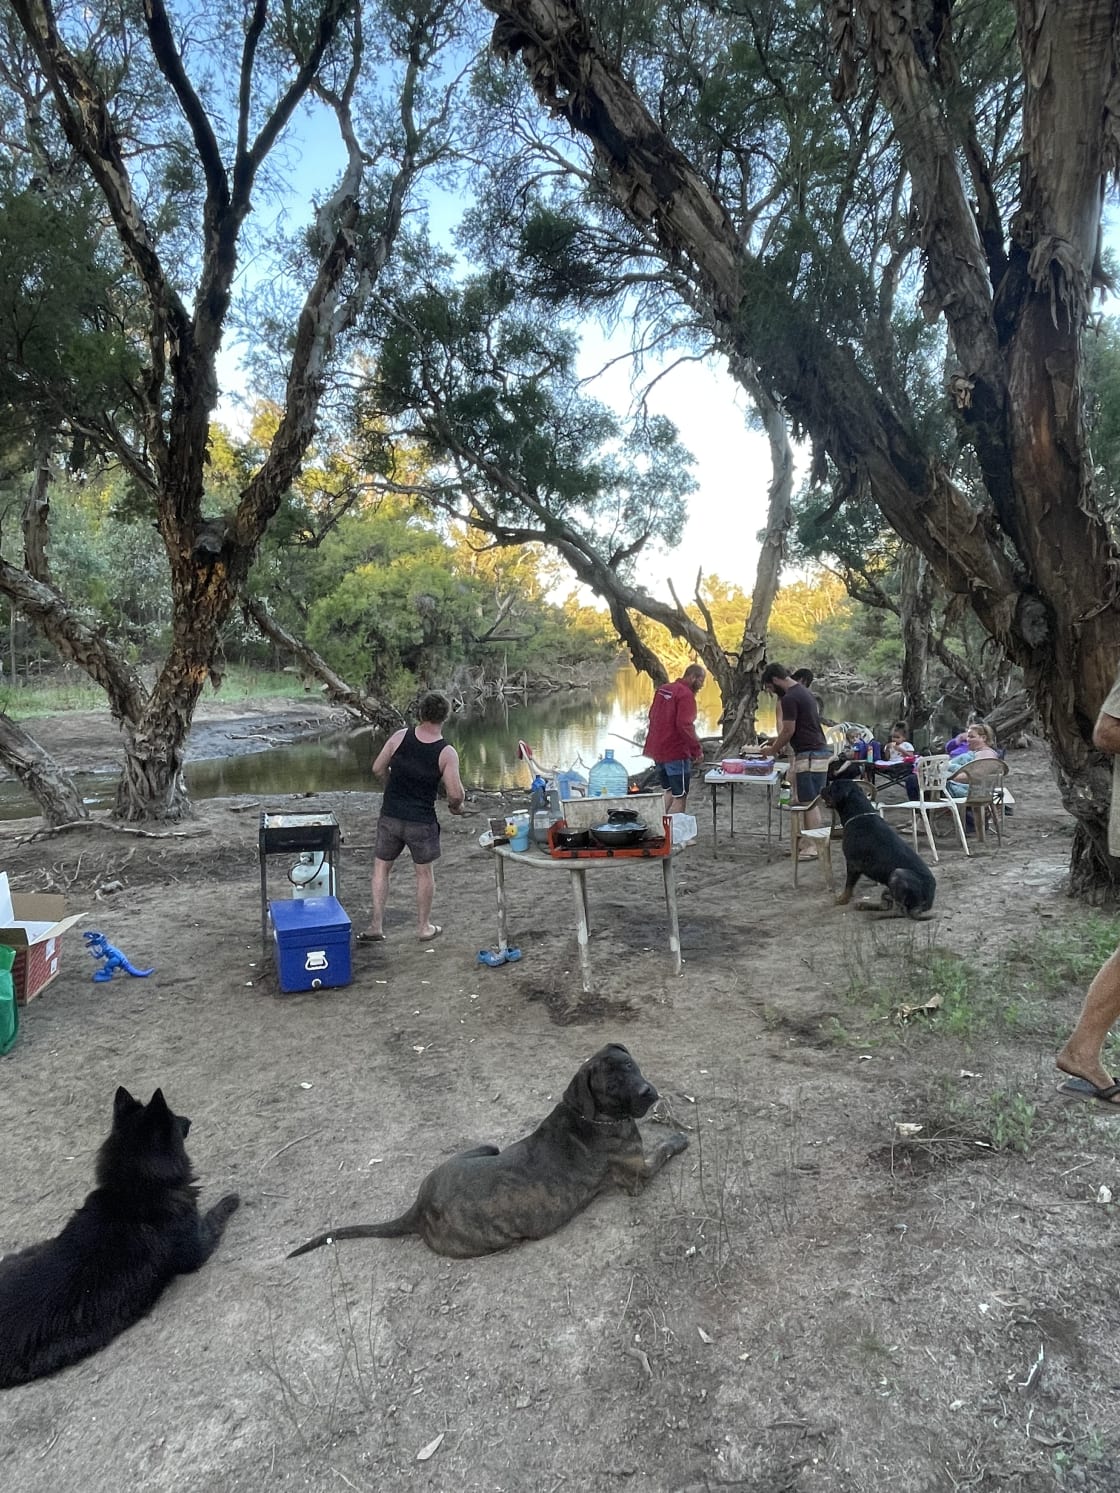 Murray Valley Camping